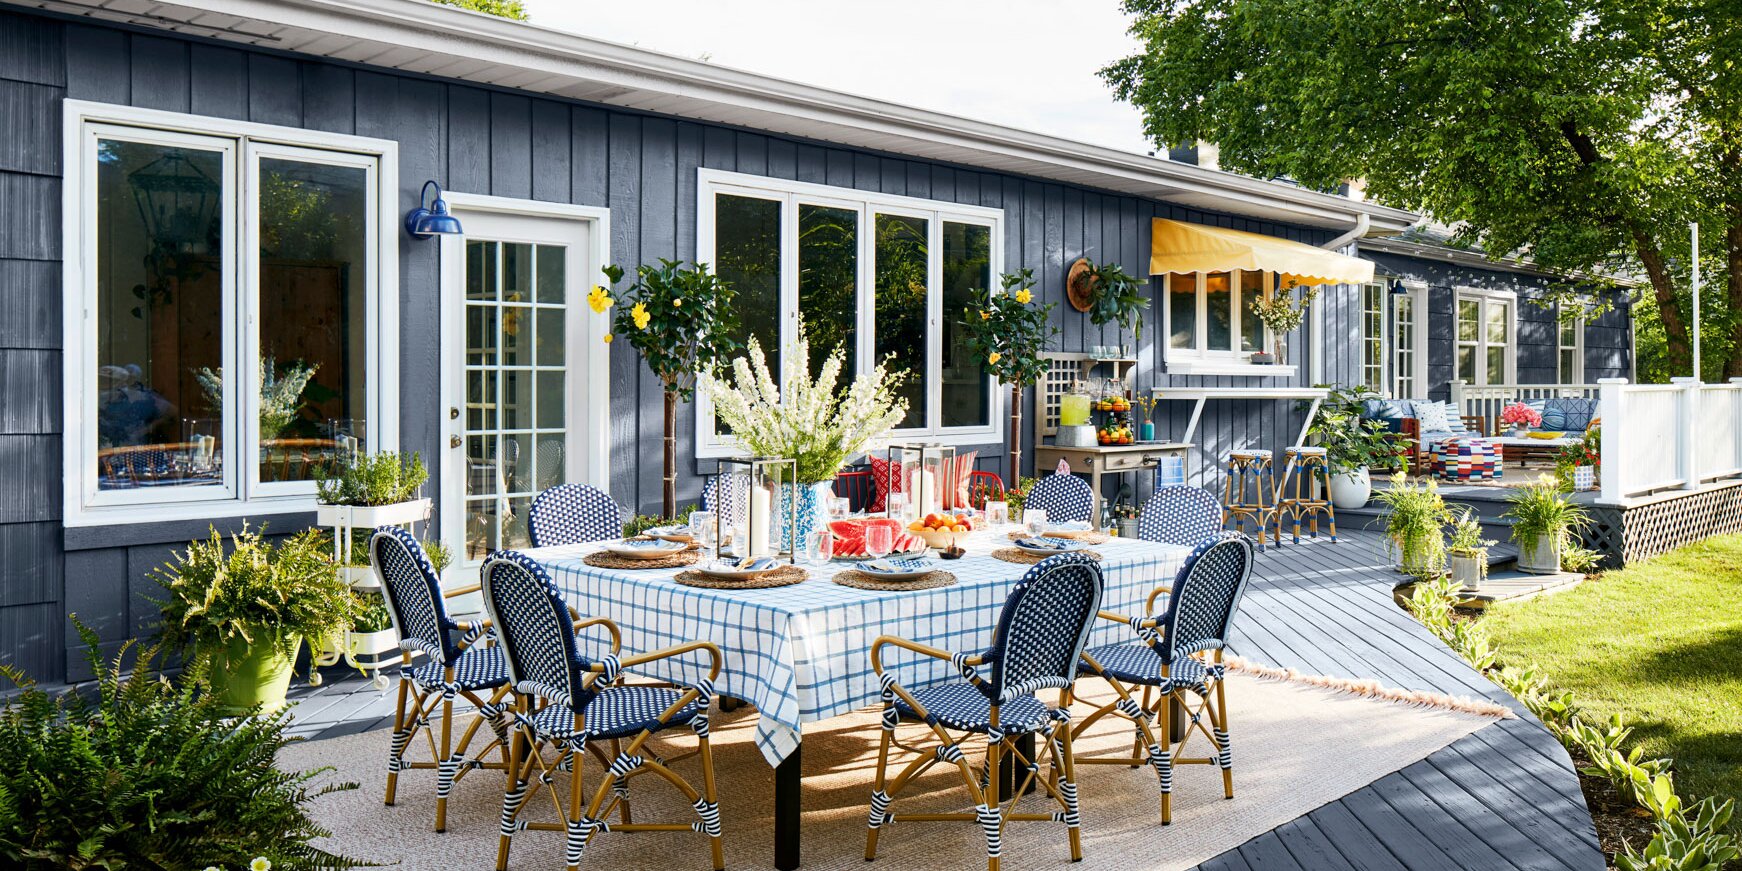 Colorful Decor and Simple Add-Ons Ready This Deck for Outdoor Living